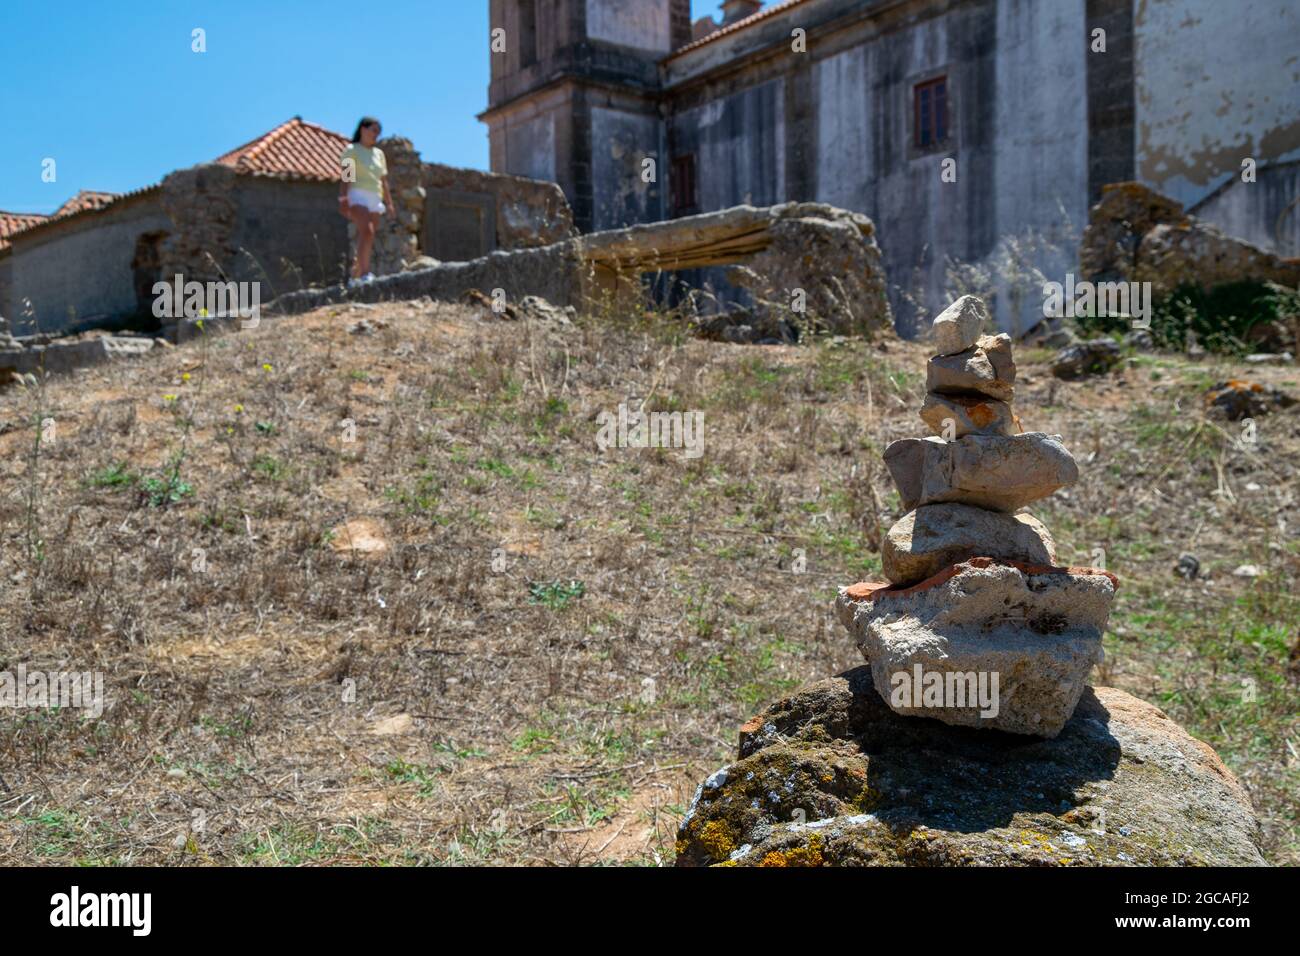 Zen rocks, vertically piled with young girl walking on the remains of a Sanctuary. Equilibrium rocks pile. Historical walks. Stock Photo